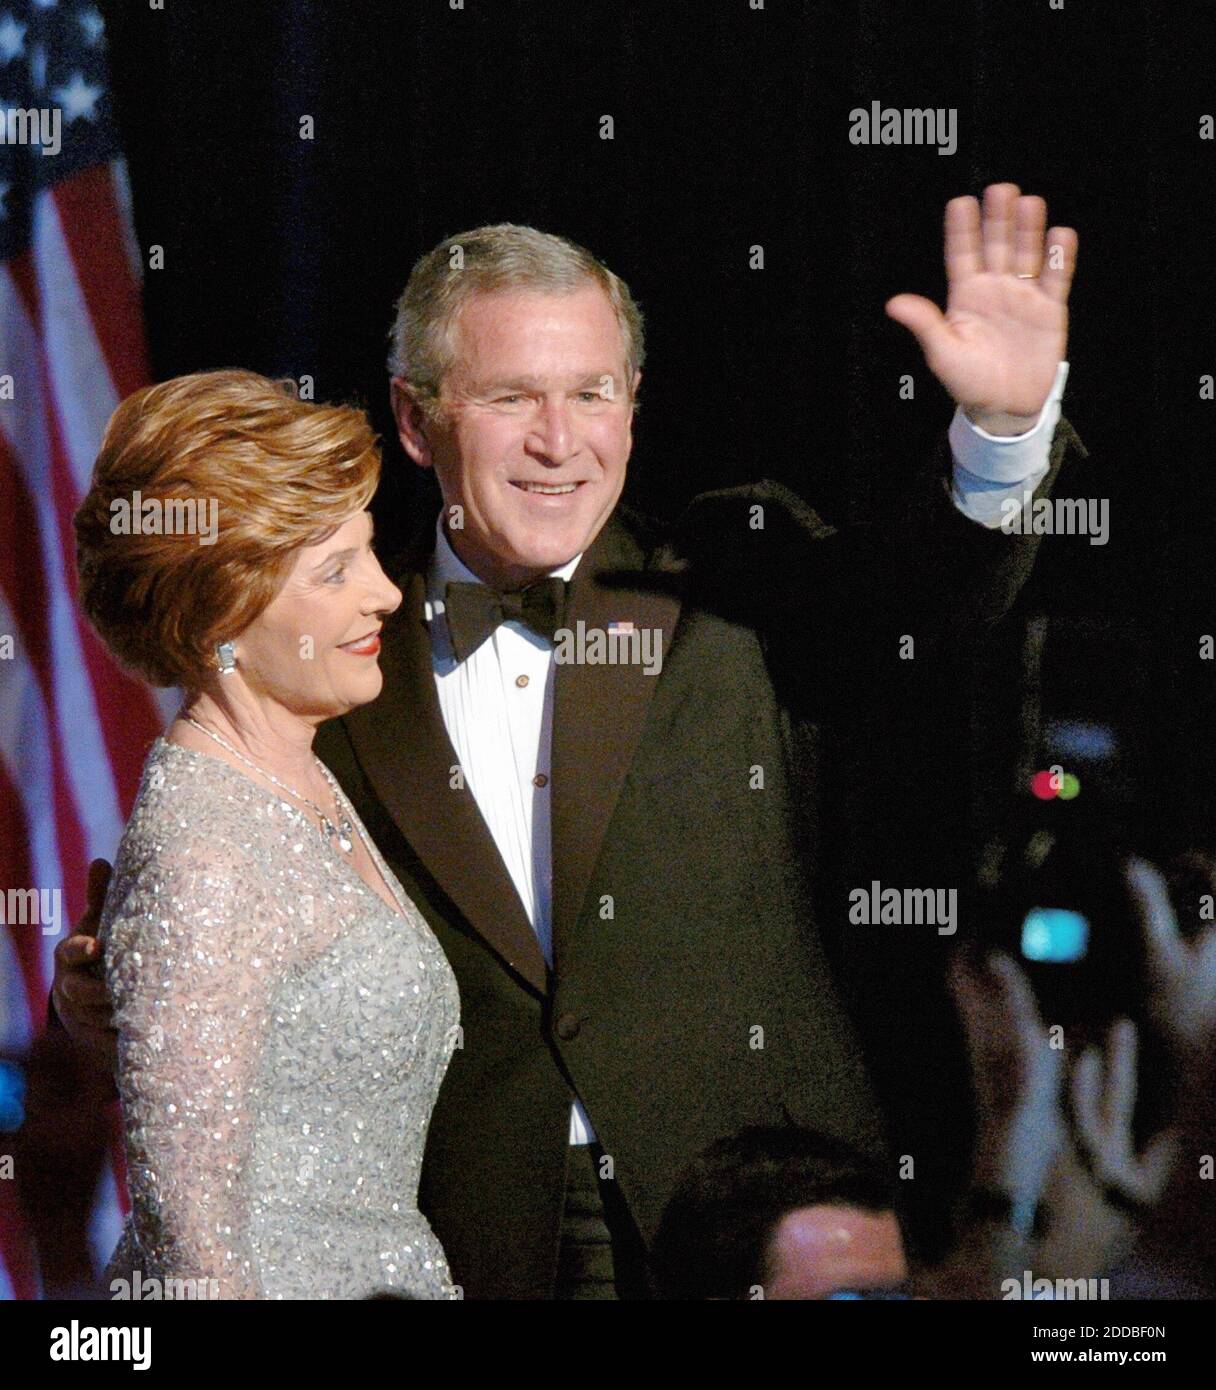 NO FILM, NO VIDEO, NO TV, NO DOCUMENTARY - President George W. Bush and first lady Laura Bush wave as they depart the Constitution Ball that is part of the inauguration festivities in Washington, DC, USA, on January 20, 2005. Photo by Georges Bridges/US News Story Slugged/KRT/ABACA. Stock Photo